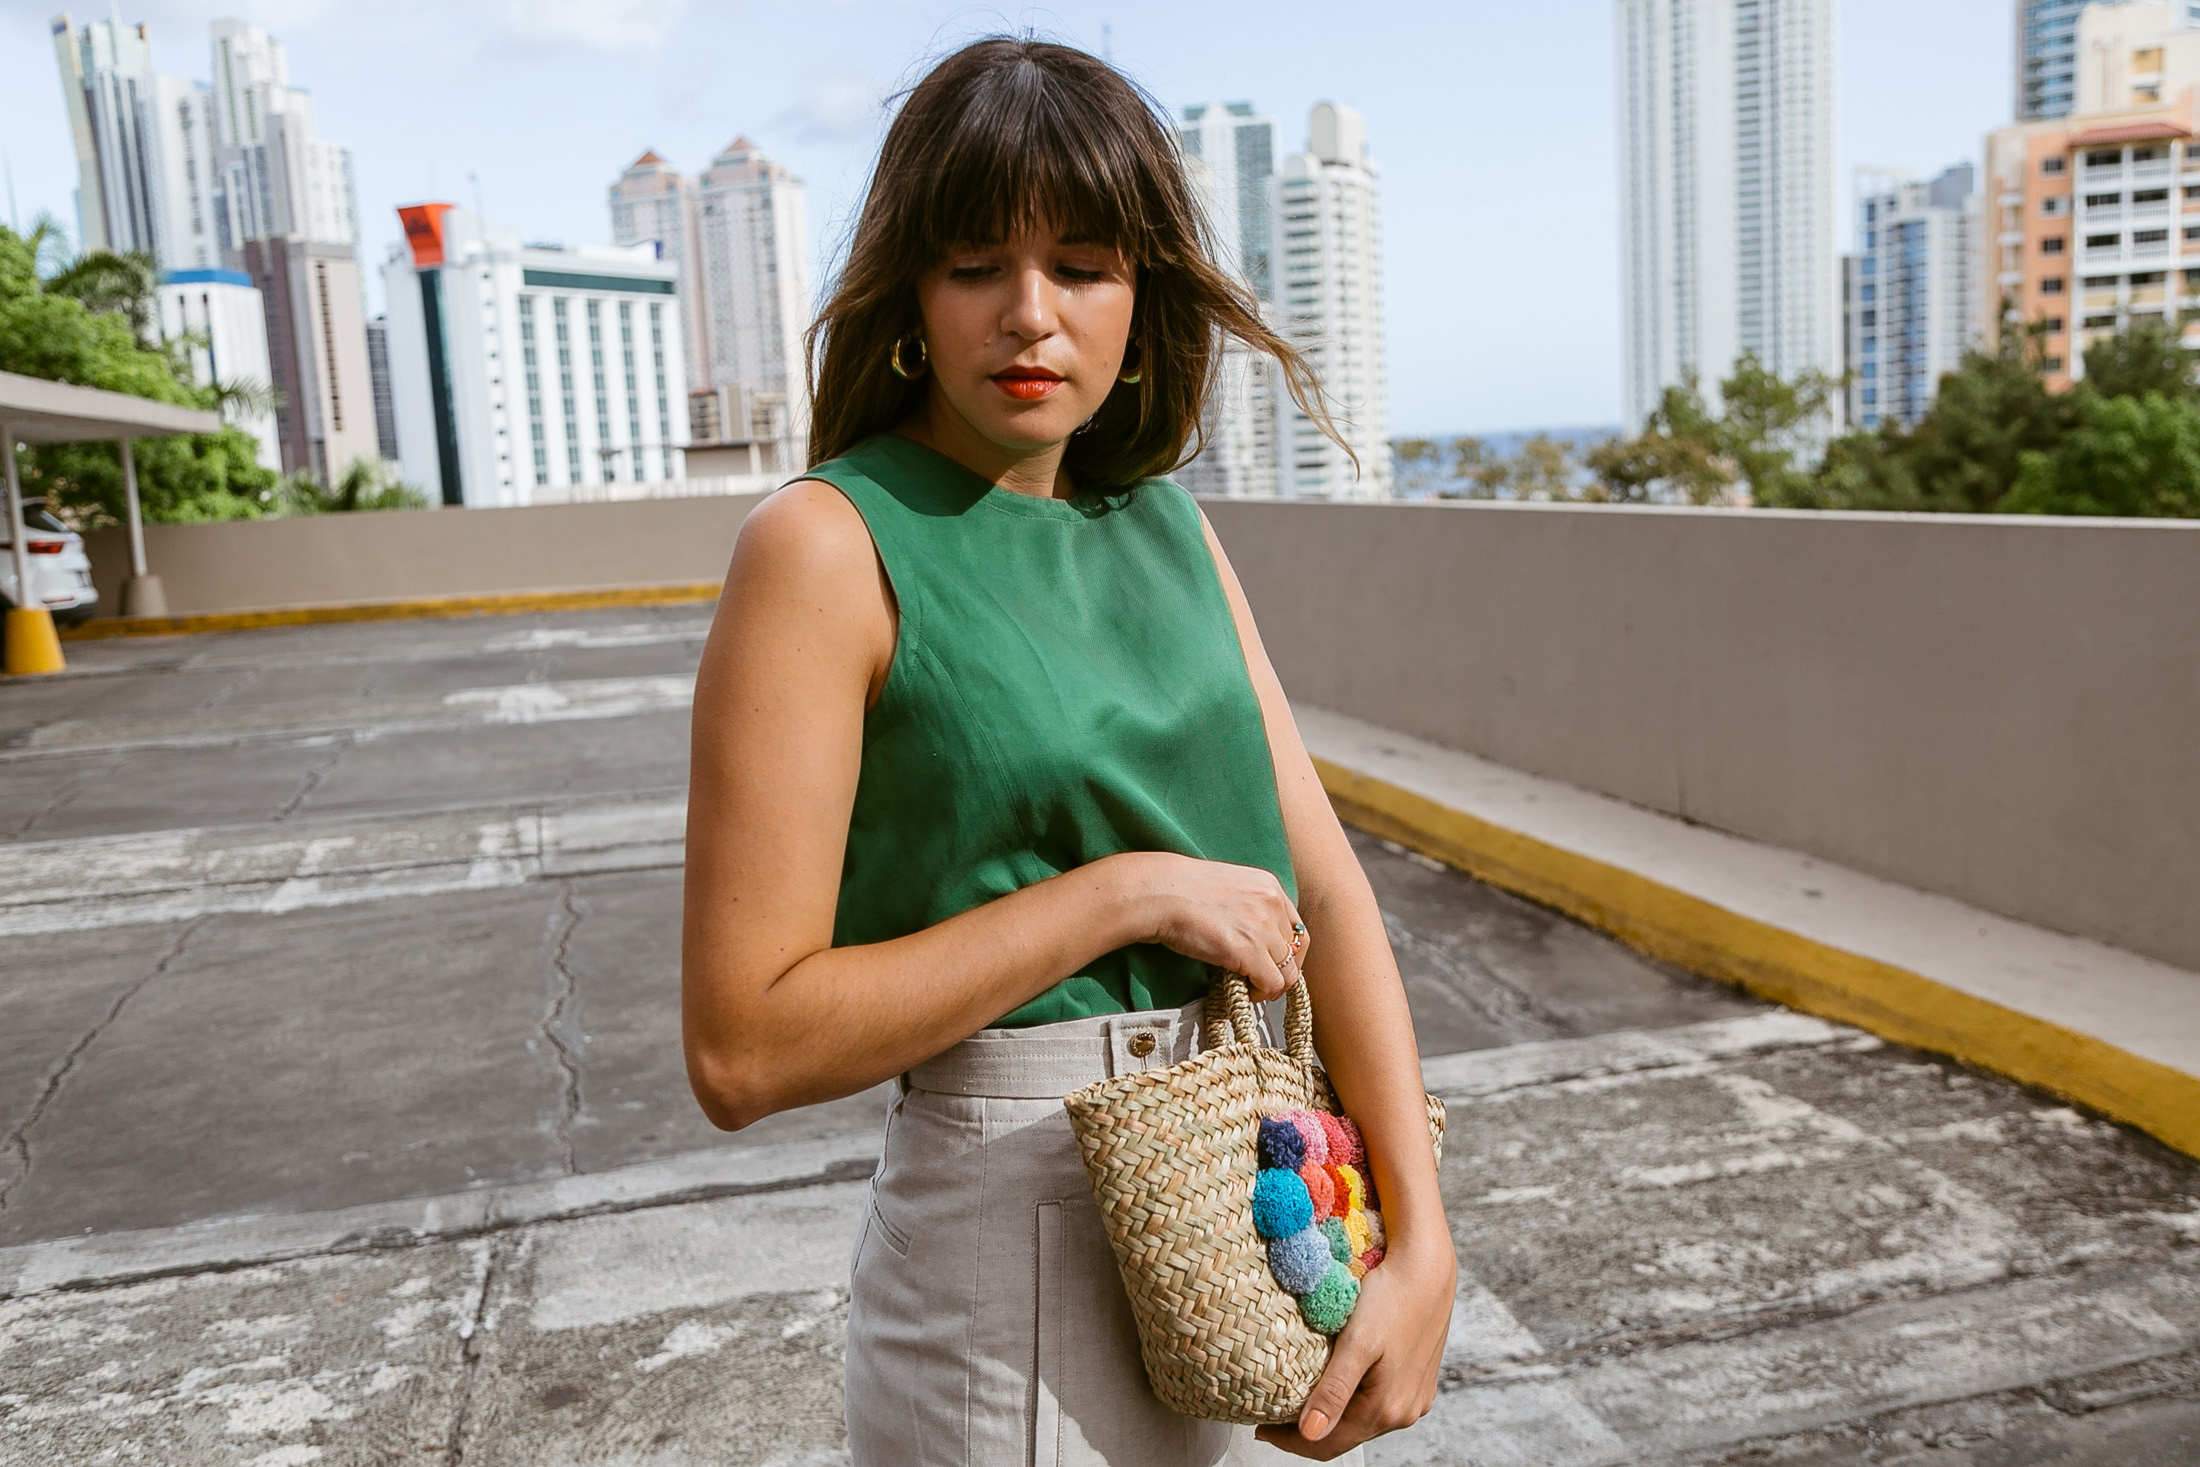 Maristella wears a small straw tote bag with colorful poms from Purificacion Garcia